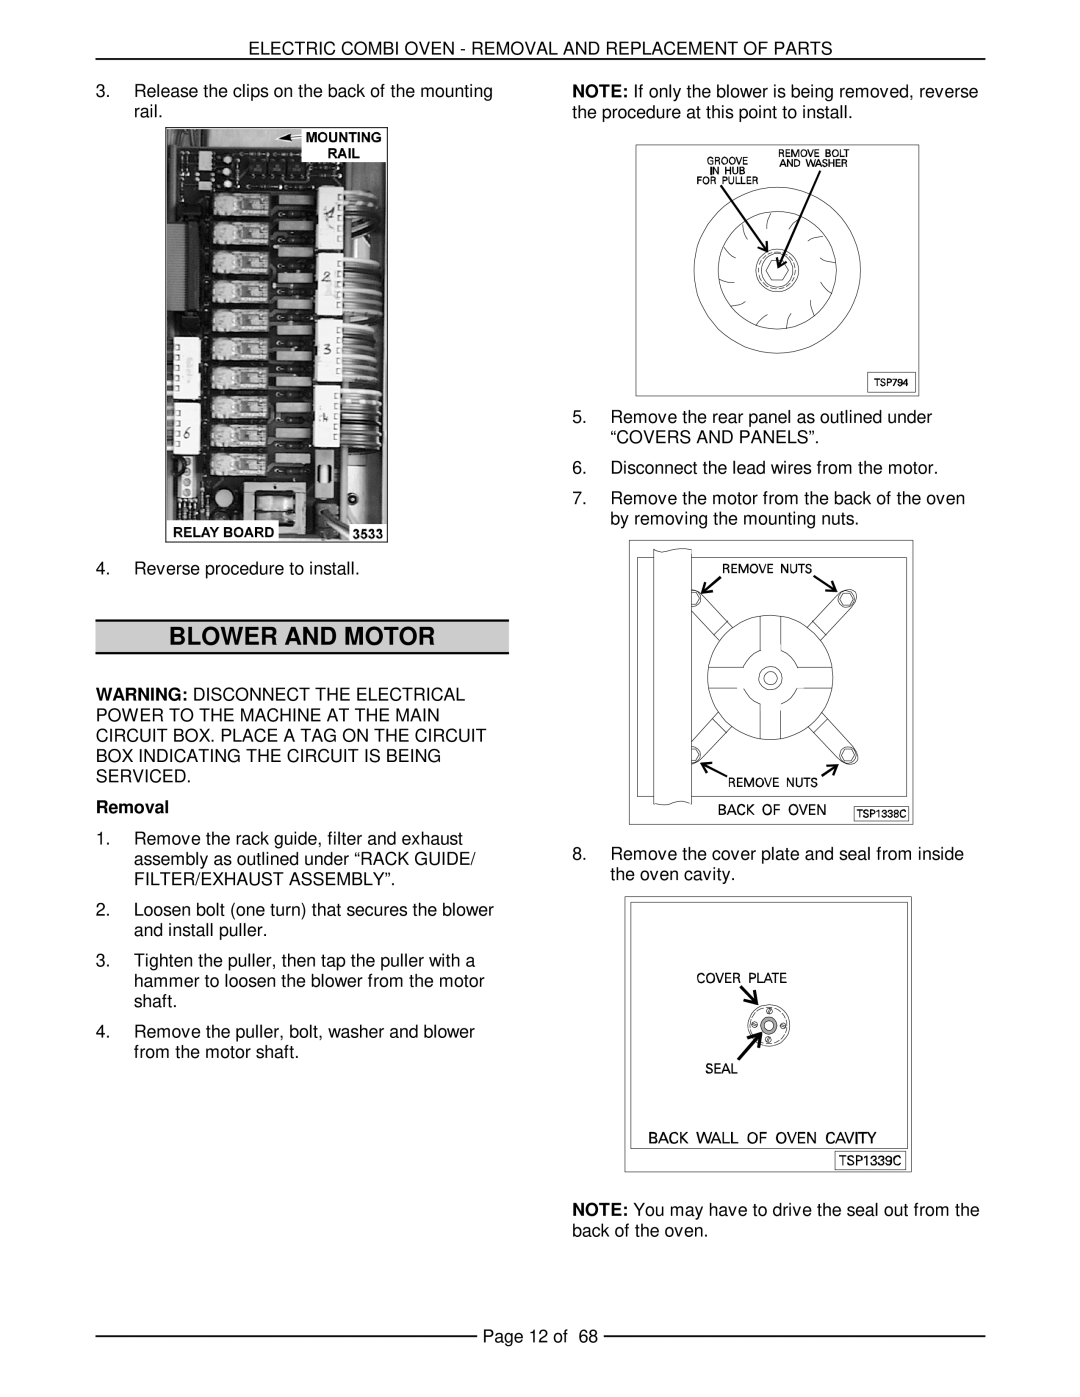 Vulcan-Hart VCE6H 126177, VCE20H 126172, VCE10H 126178, VCE20F 126173, VCE10F 126179 service manual Blower And Motor, Removal 